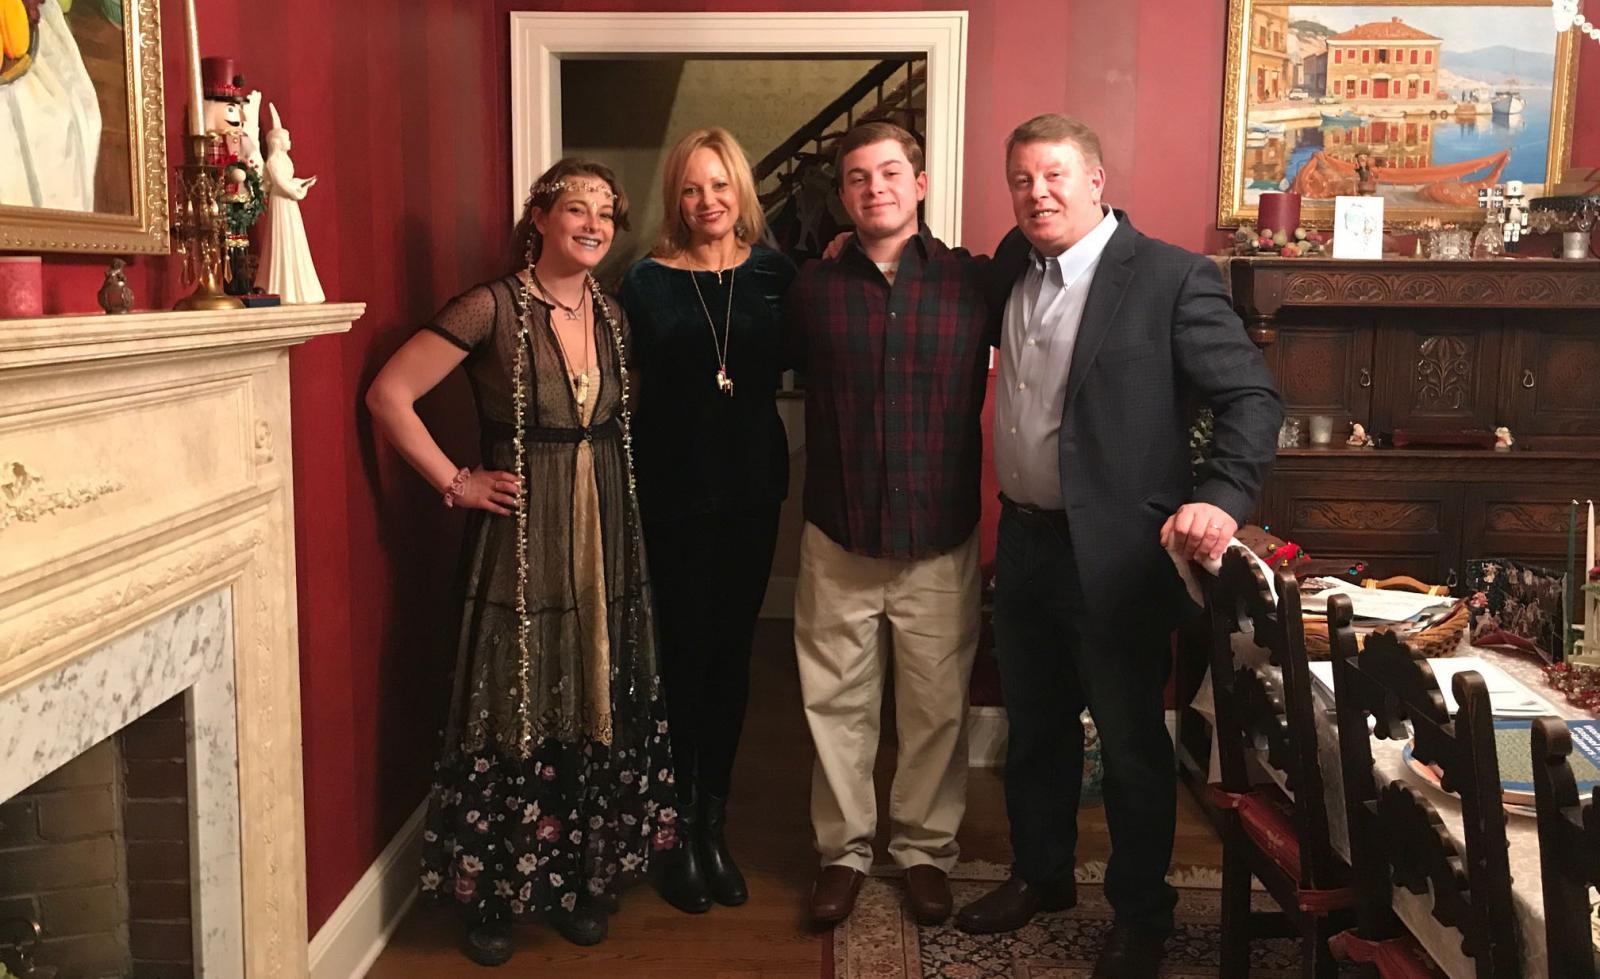 Claire, Rebekah, Paul Jr., and Paul Simpson standing together in their Ridgewood, New Jersey home.